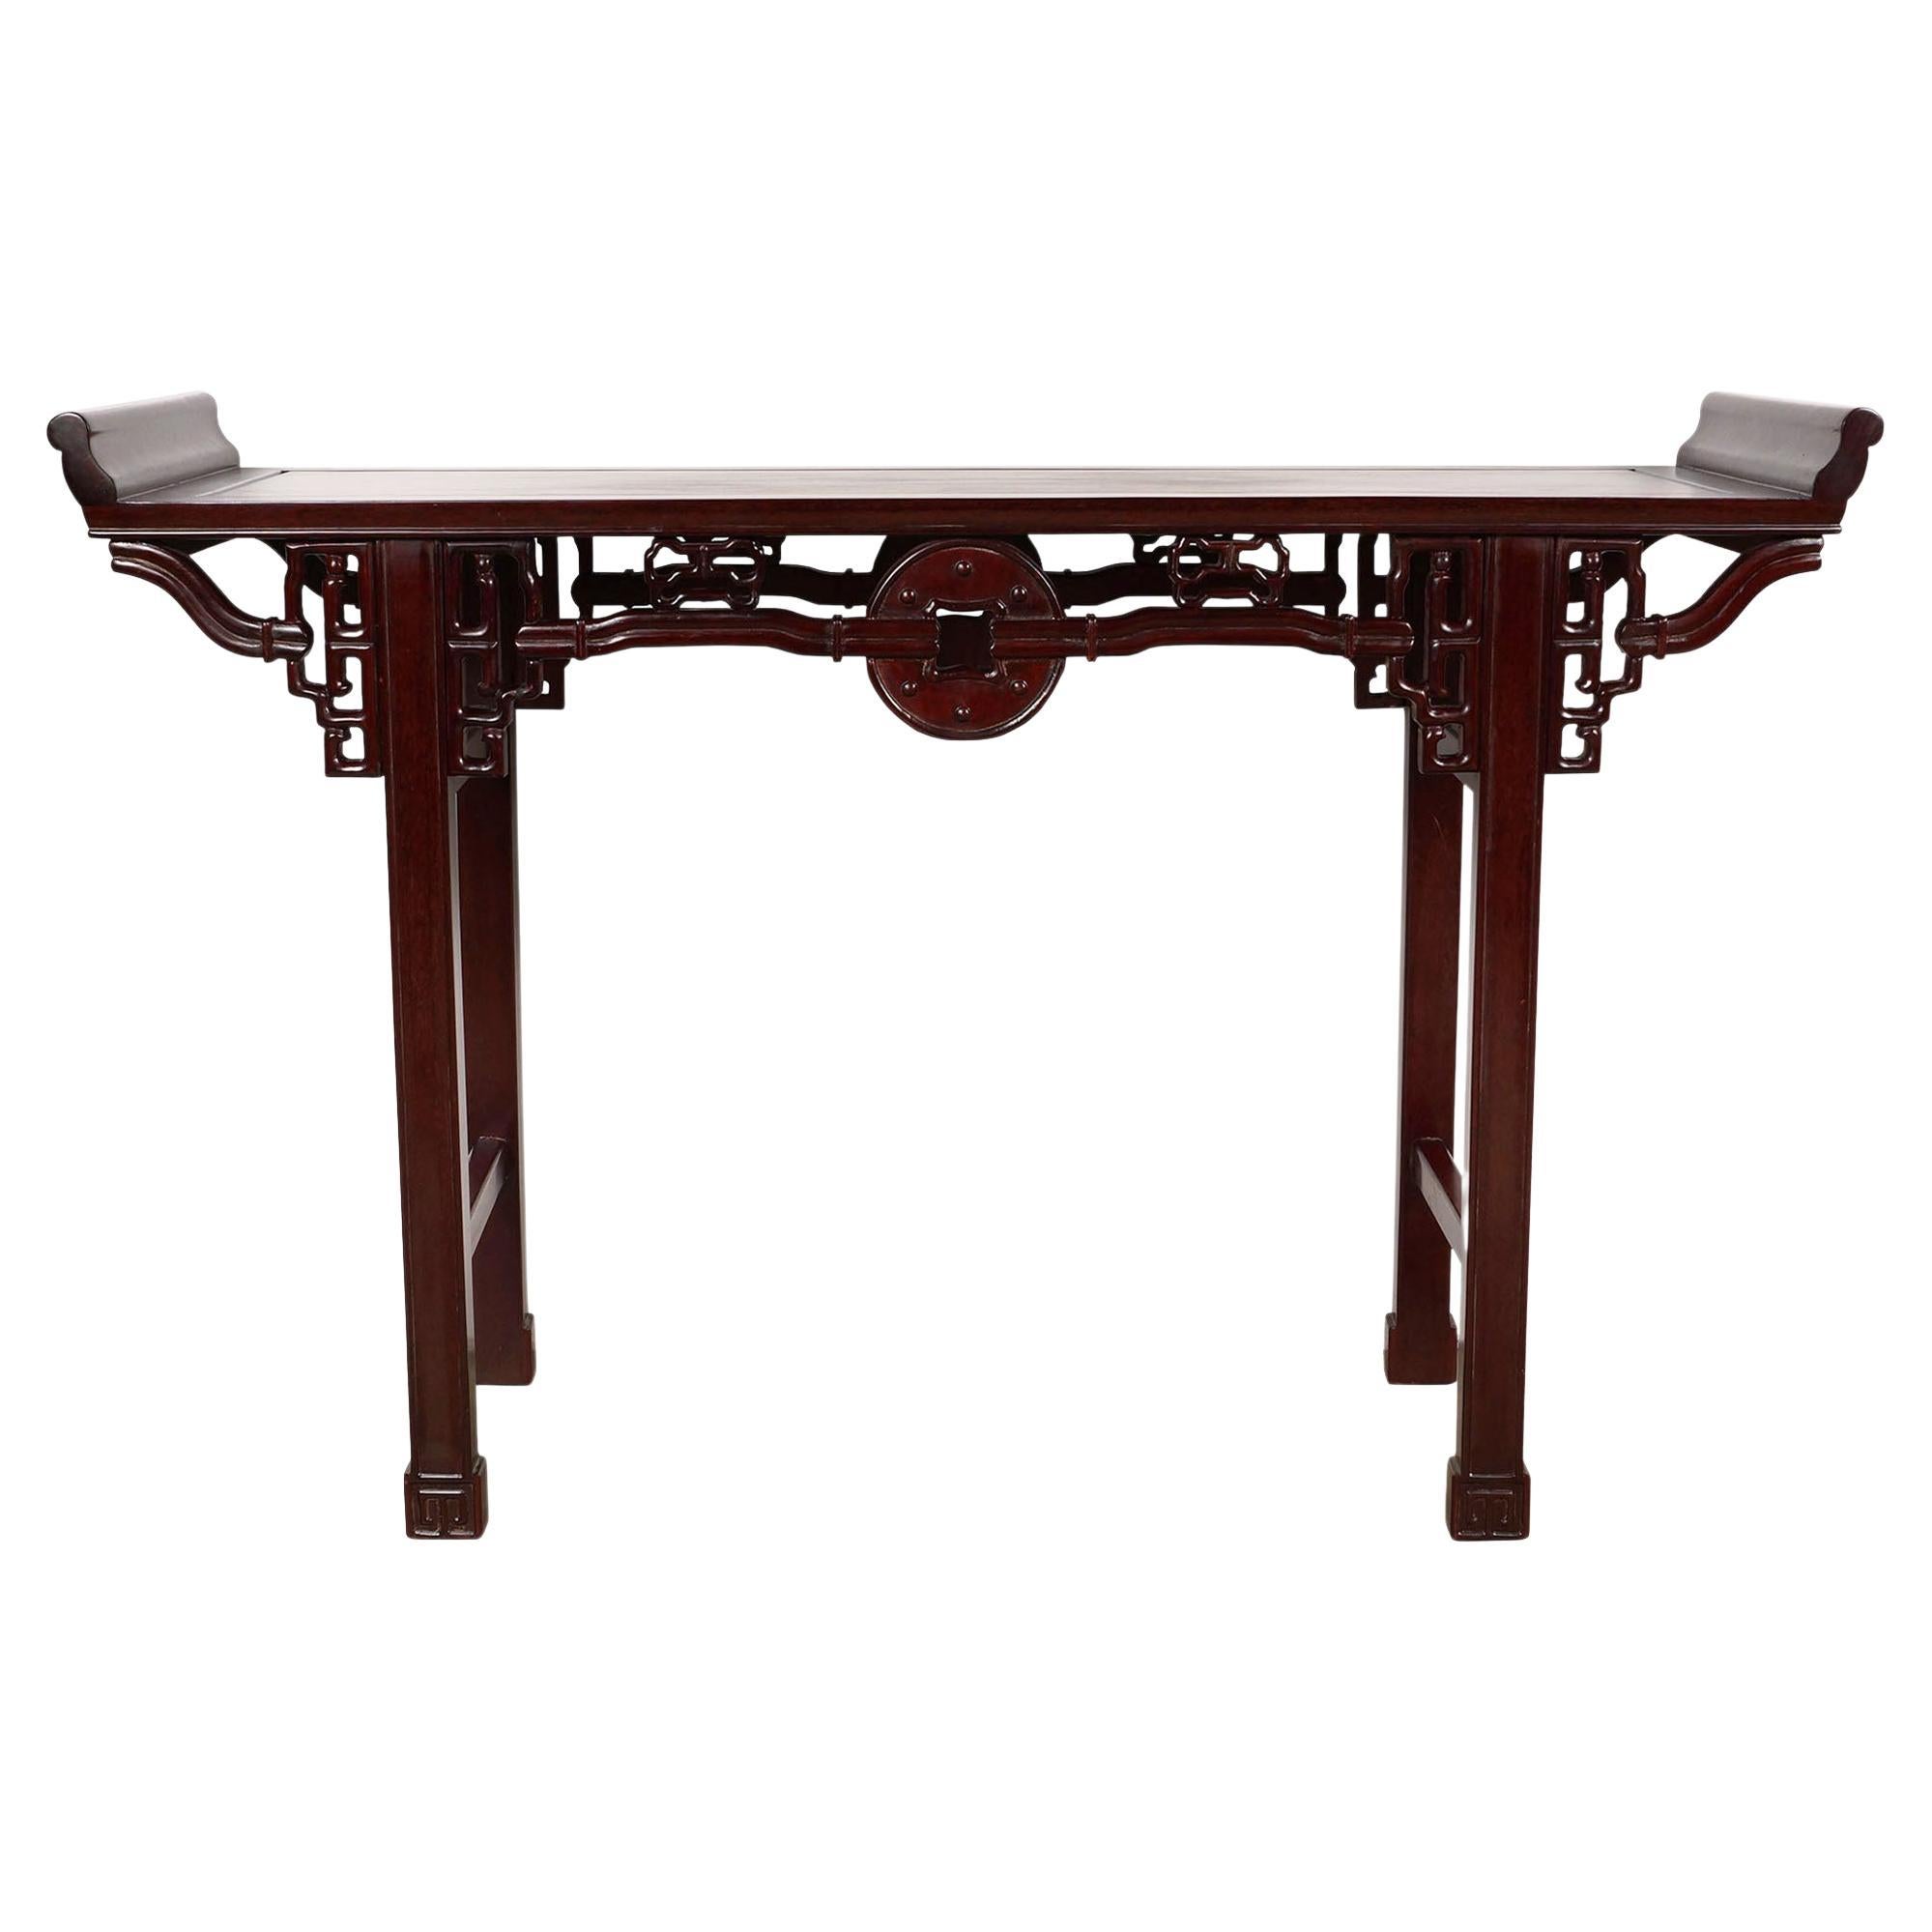 Early 20th Century Chinese Carved Rosewood Altar Table